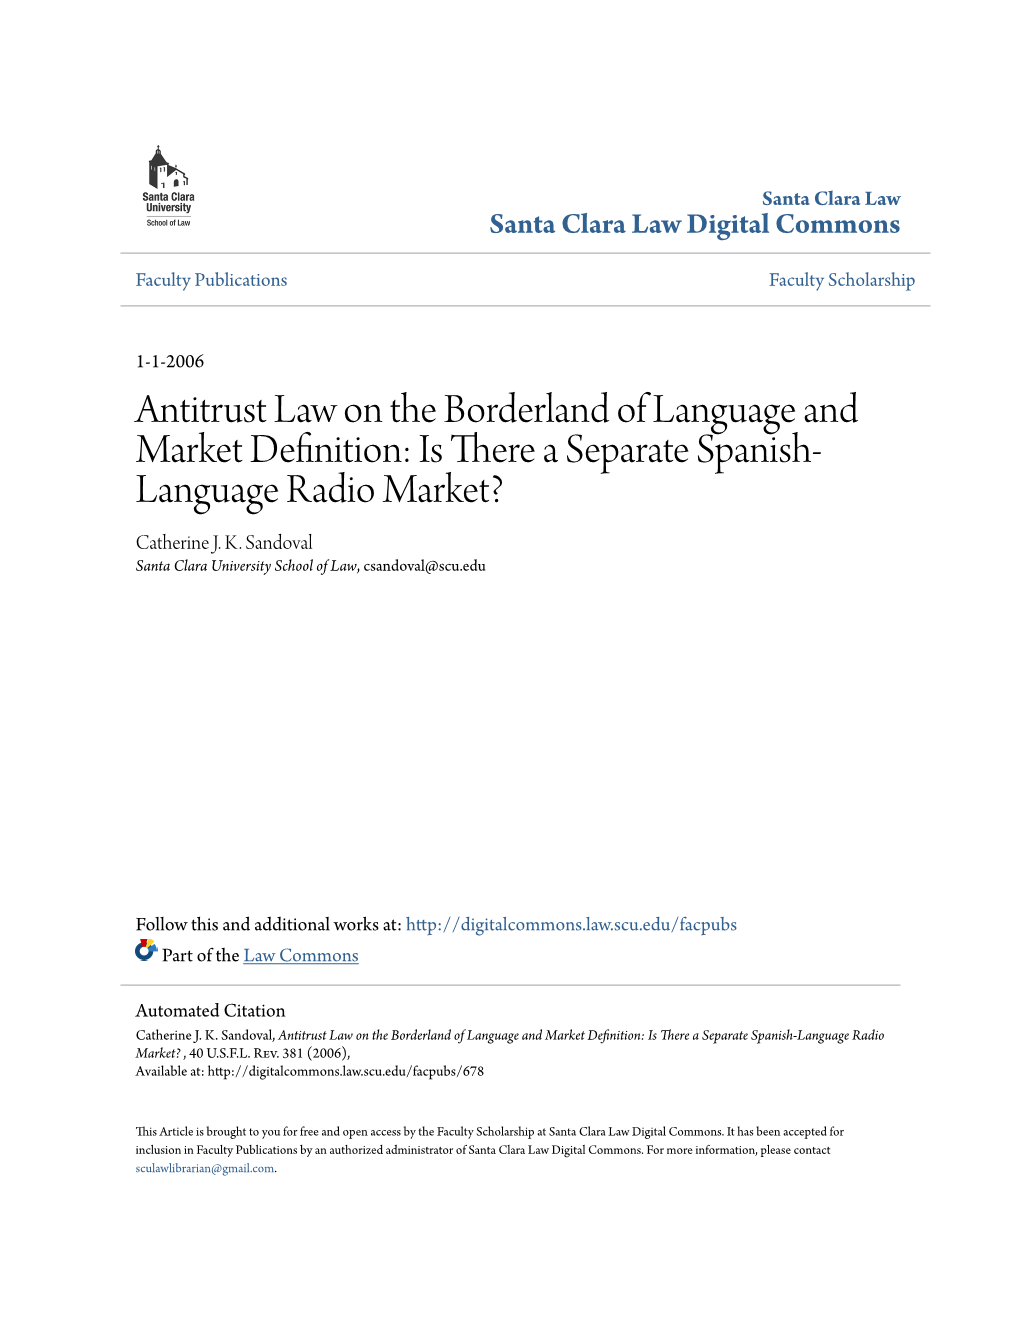 Antitrust Law on the Borderland of Language and Market Definition: Is There a Separate Spanish- Language Radio Market? Catherine J